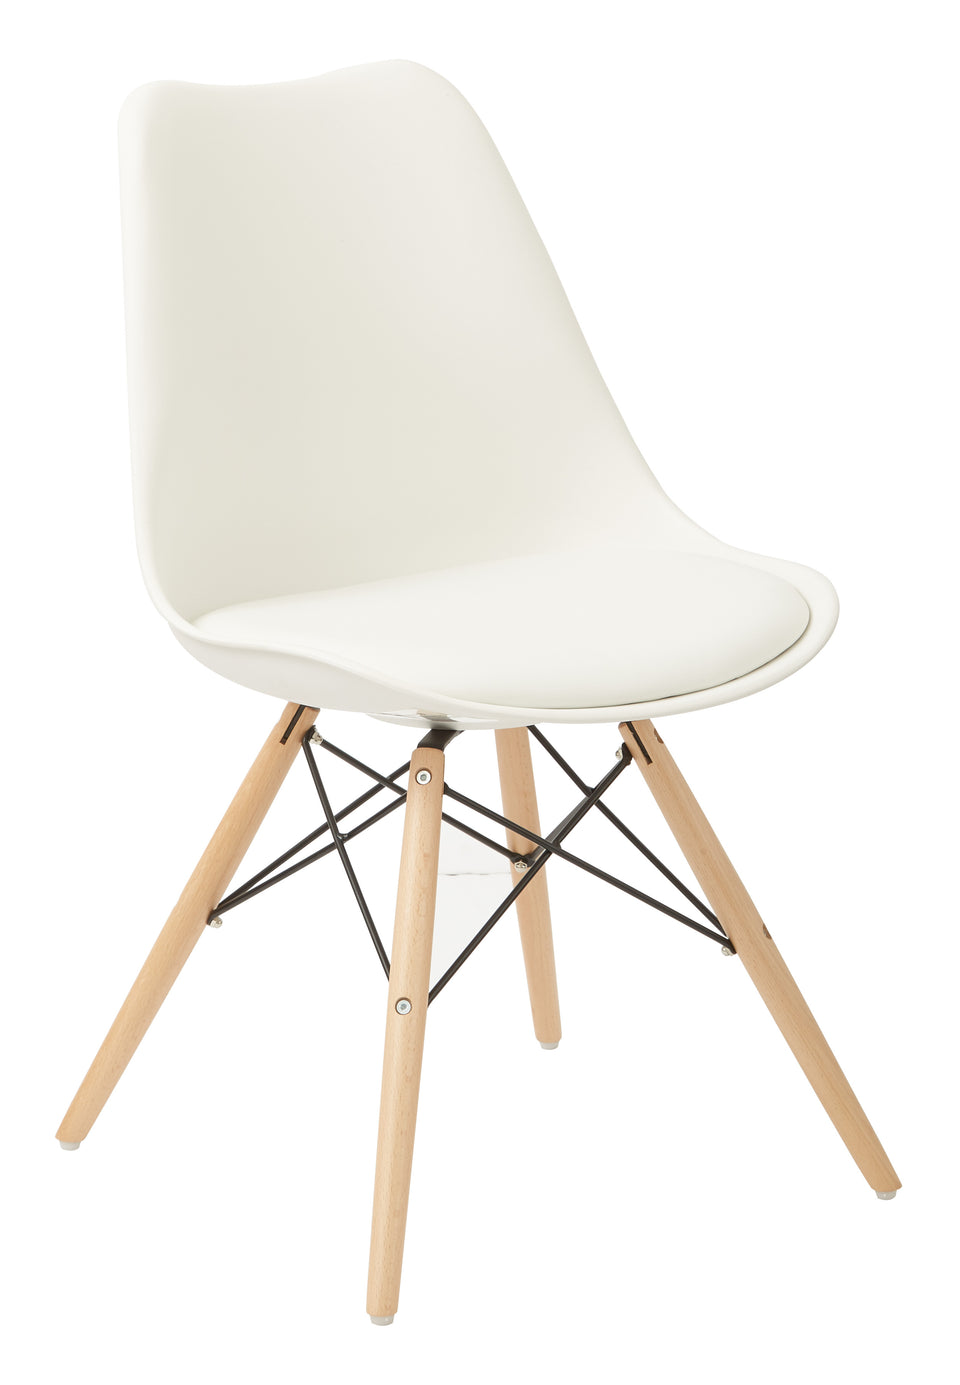 mid century modern aimes white bucket chair with natural post legs scandinavian design inspired from decurban.com